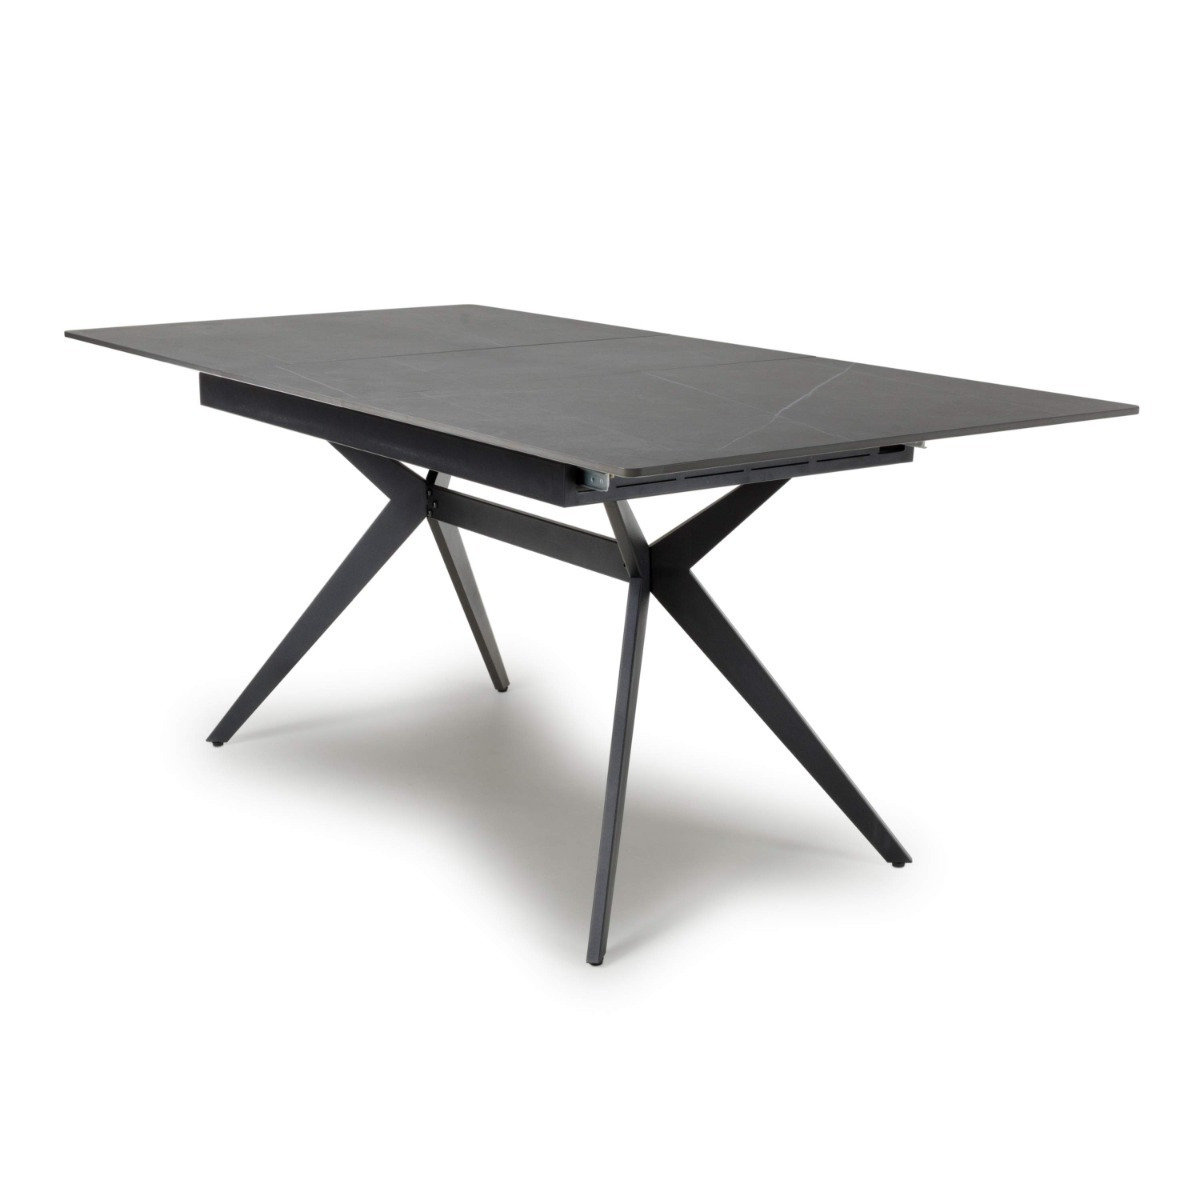 Flair Timor 1.8m Extending Dining Table Grey - image 1